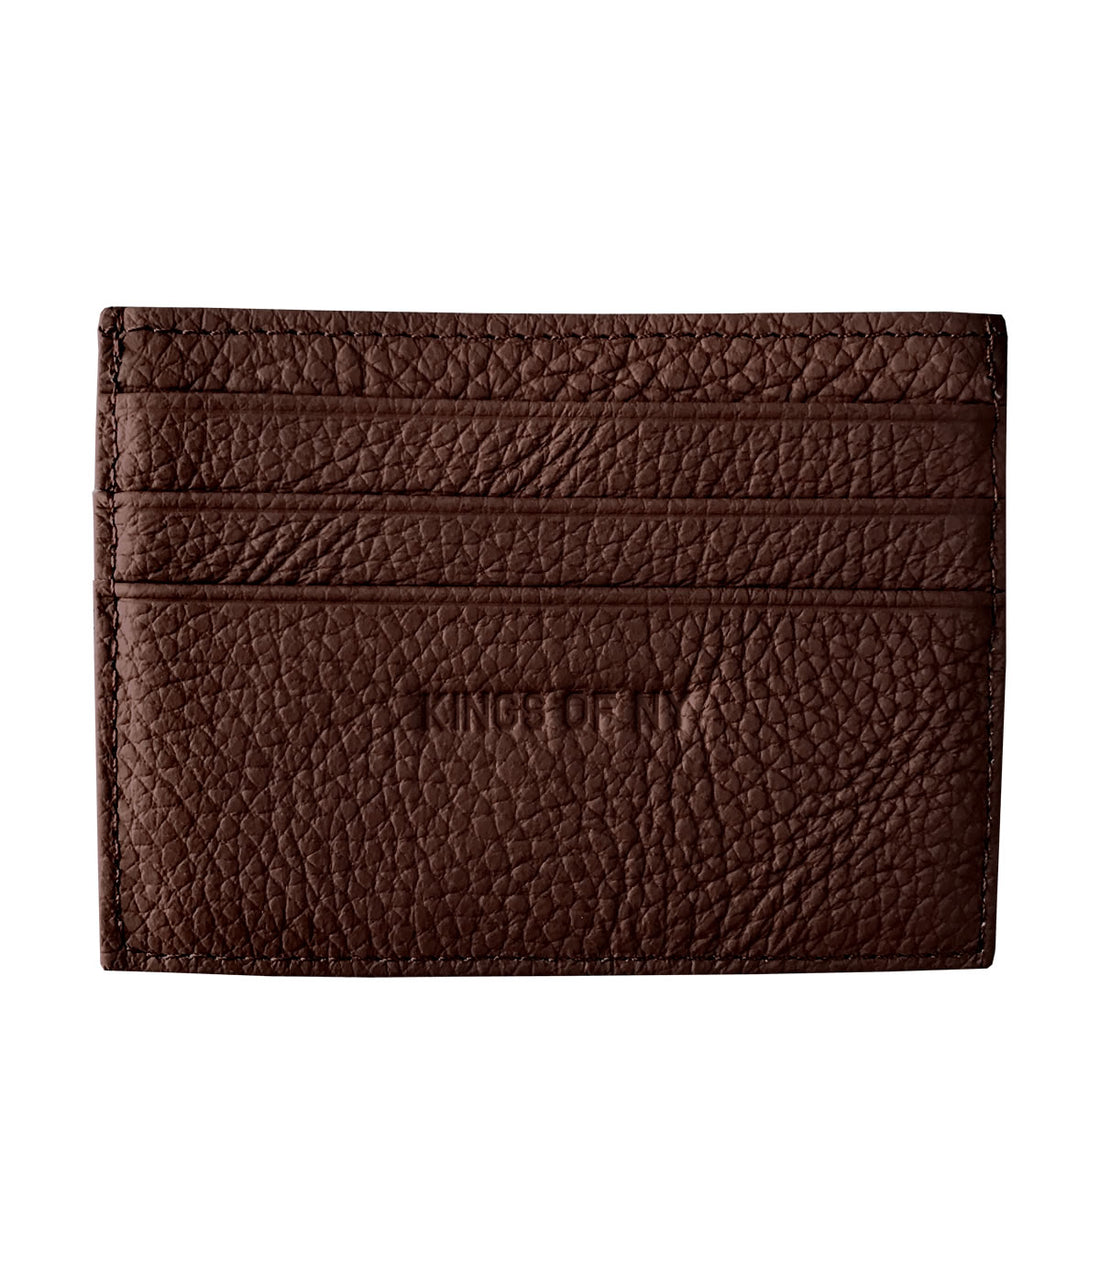 Kings Of NY Pebble Leather Card Holder Wallet Brown